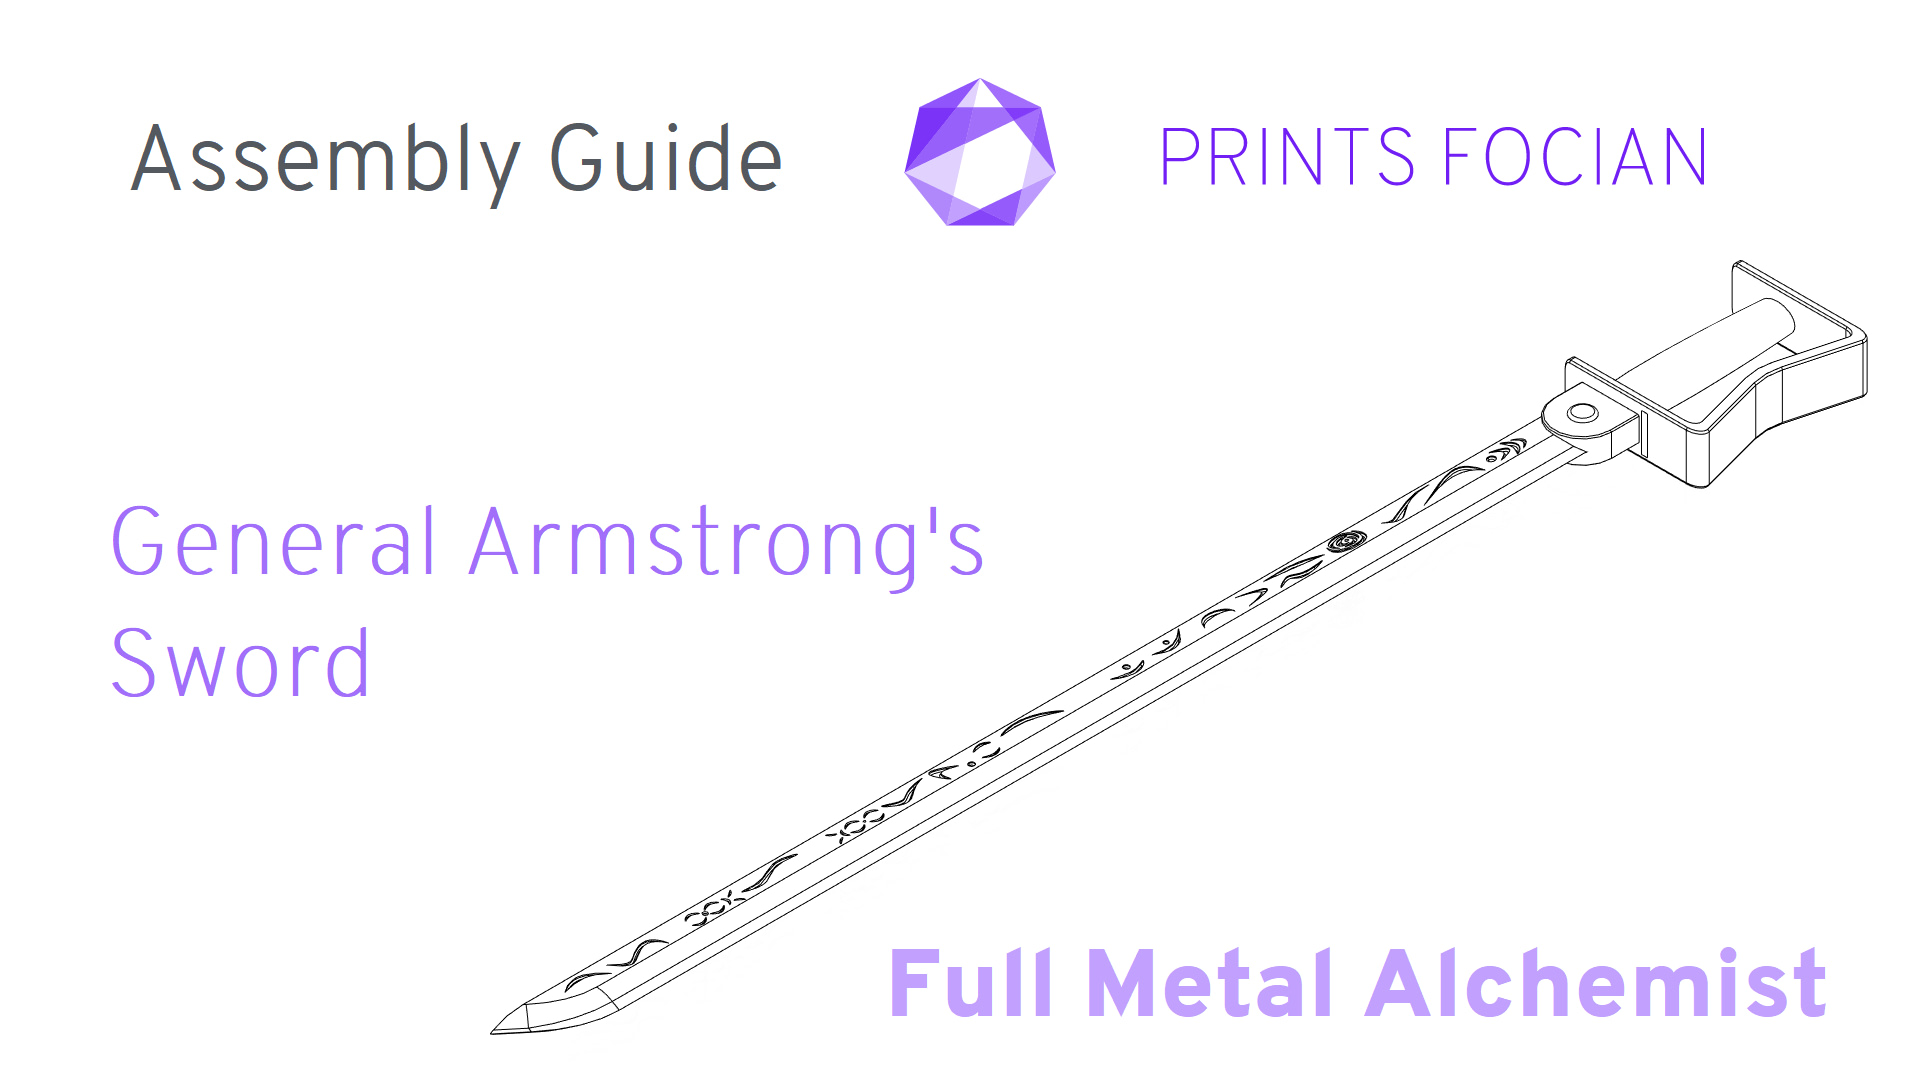 Wireframe image of the General Armstrong's Sword on a white background. Prints Focian Icon top and central. Text: Purple Prints Focian, General Armstrong's Sword, Full Metal Alchemist and dark grey Assembly Guide